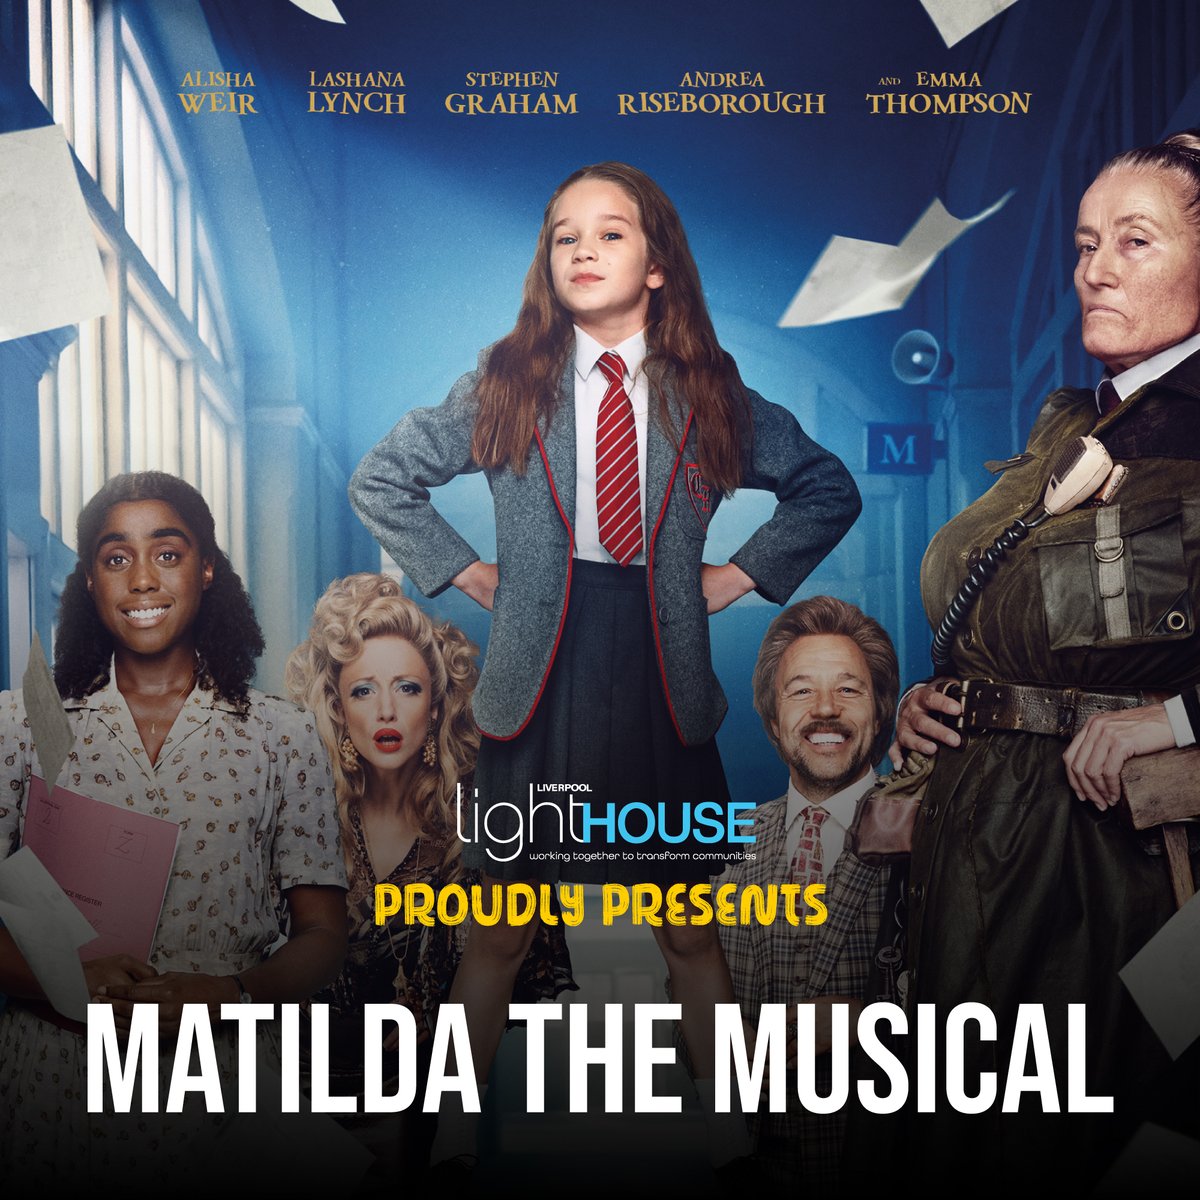 ANNOUNCEMENT! 📣 Join us for this month's charity cinema hosting: Matilda! 📆 Friday 24TH May ⏰ Doors open 5PM, film starts at 6PM 📍 Liverpool Lighthouse, Oakfield Road, L4 0UF Grab your tickets quick! ➡️ ticketsource.co.uk/liverpool-ligh…